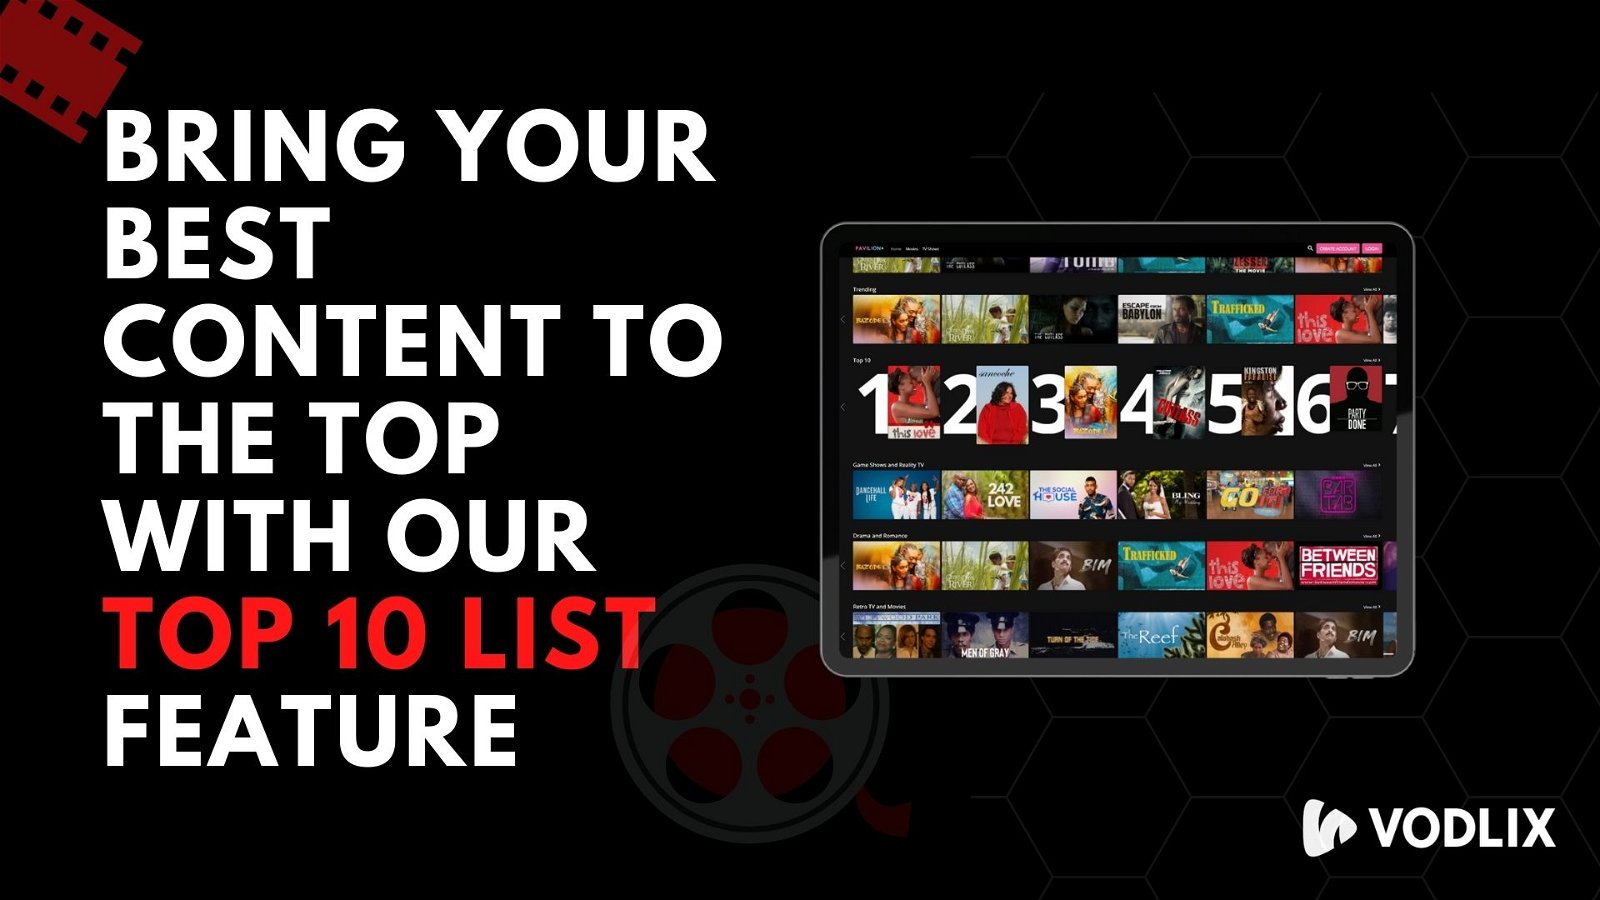 Bring your best content to the top with our Top 10 list Feature